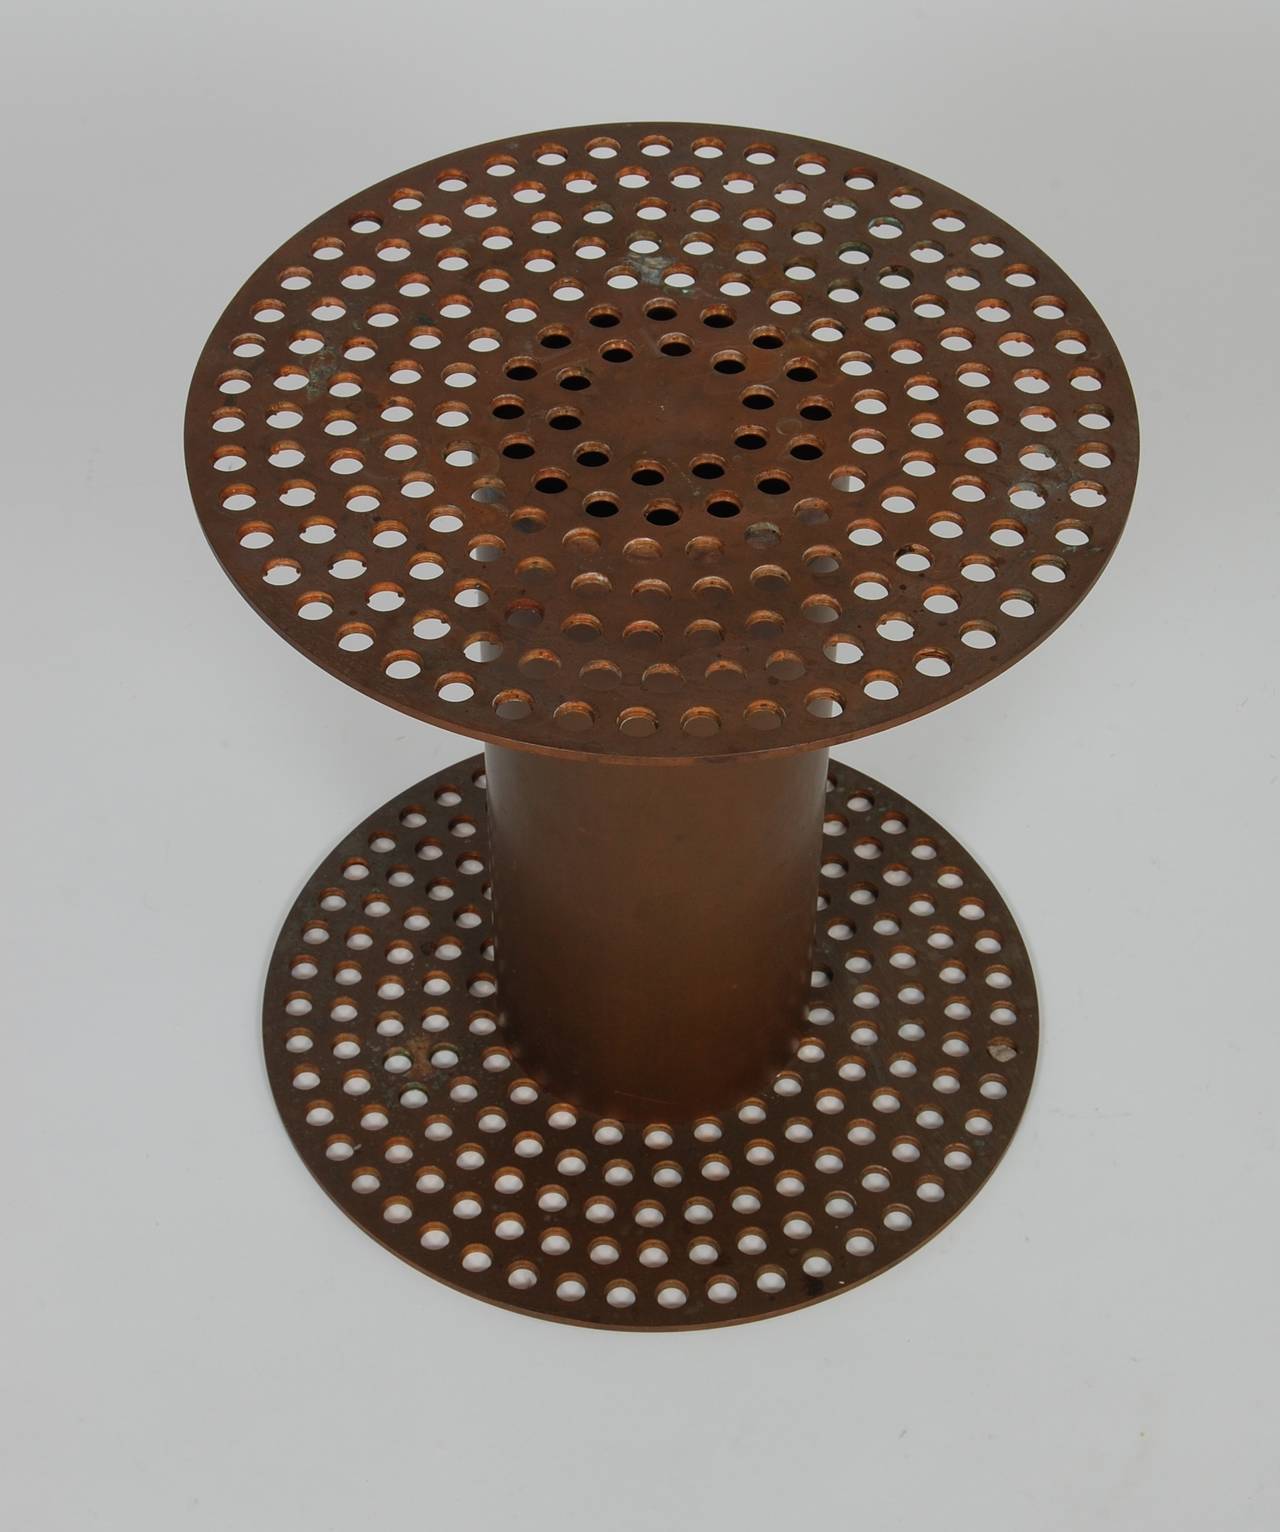 Solid brass side table with perforations on the top and base, great patina to the surface.